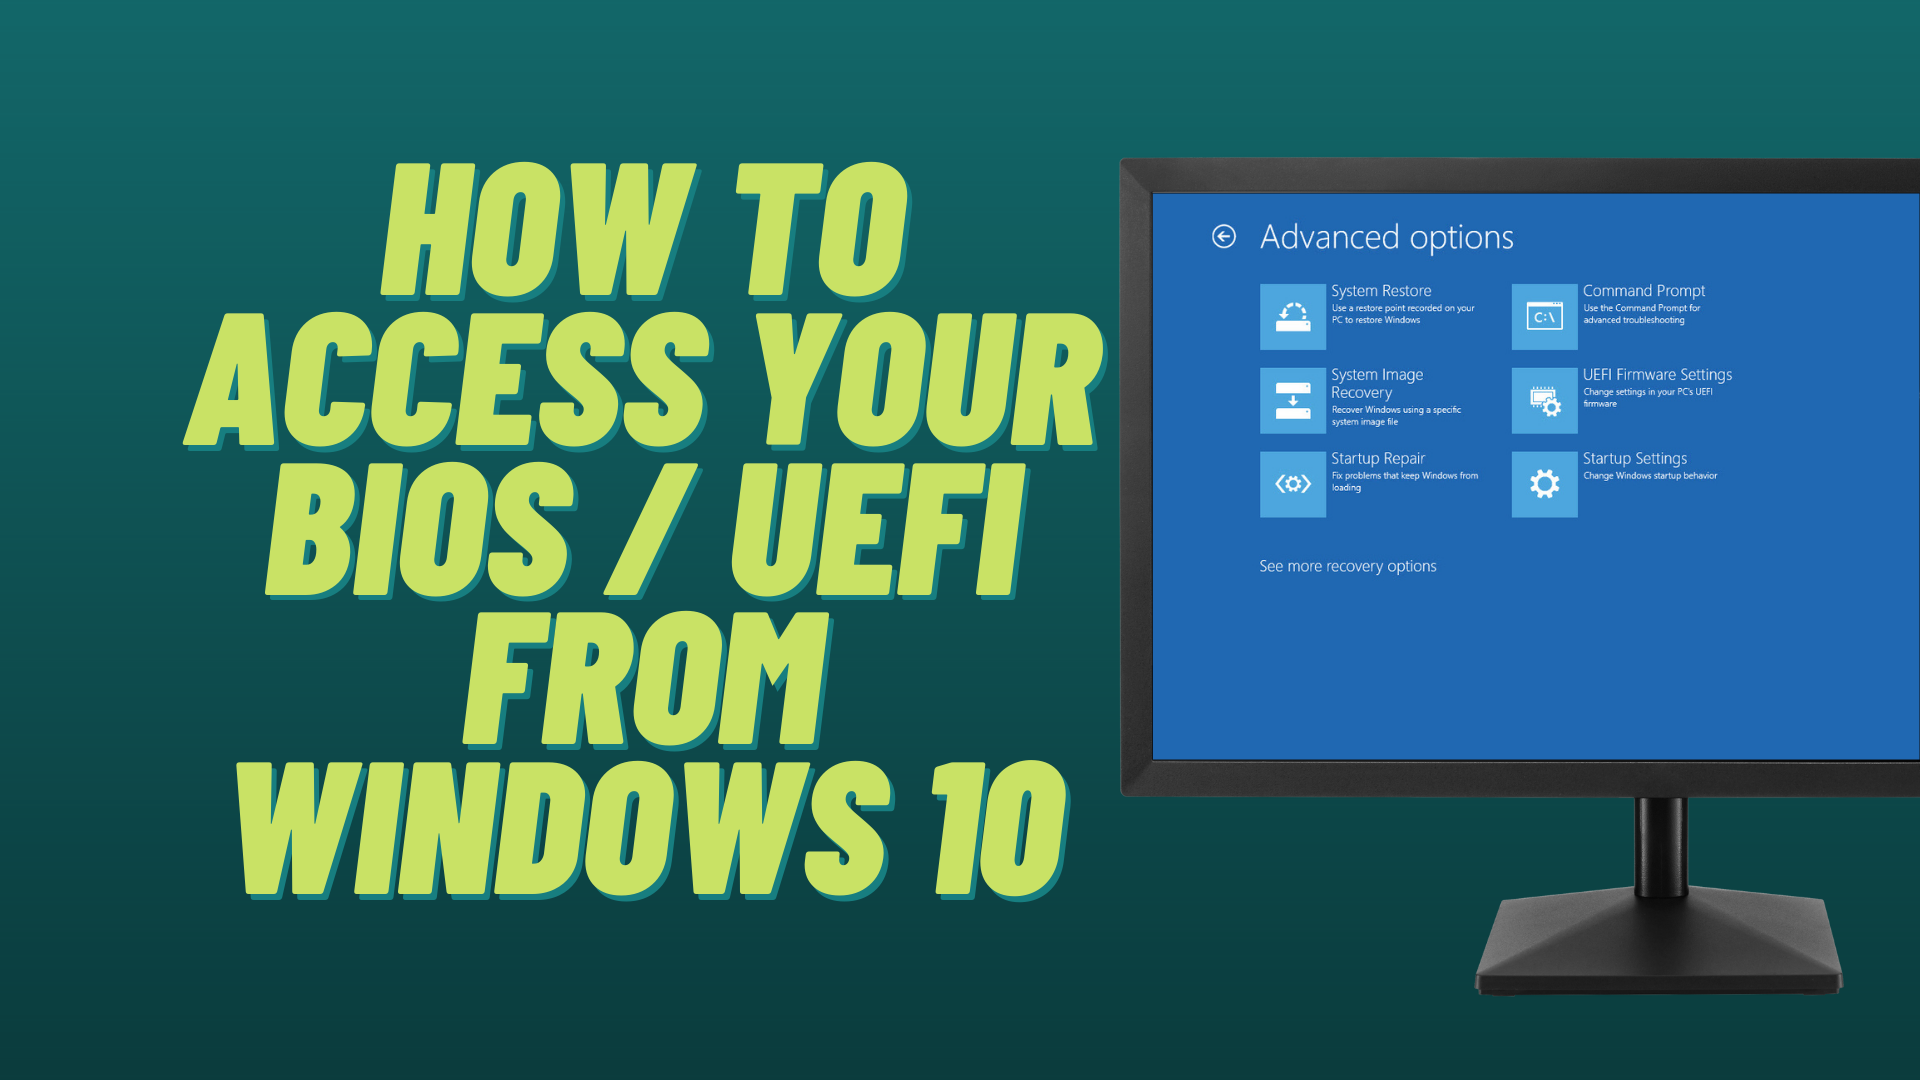 How To Access Your Bios Uefi From Windows 10